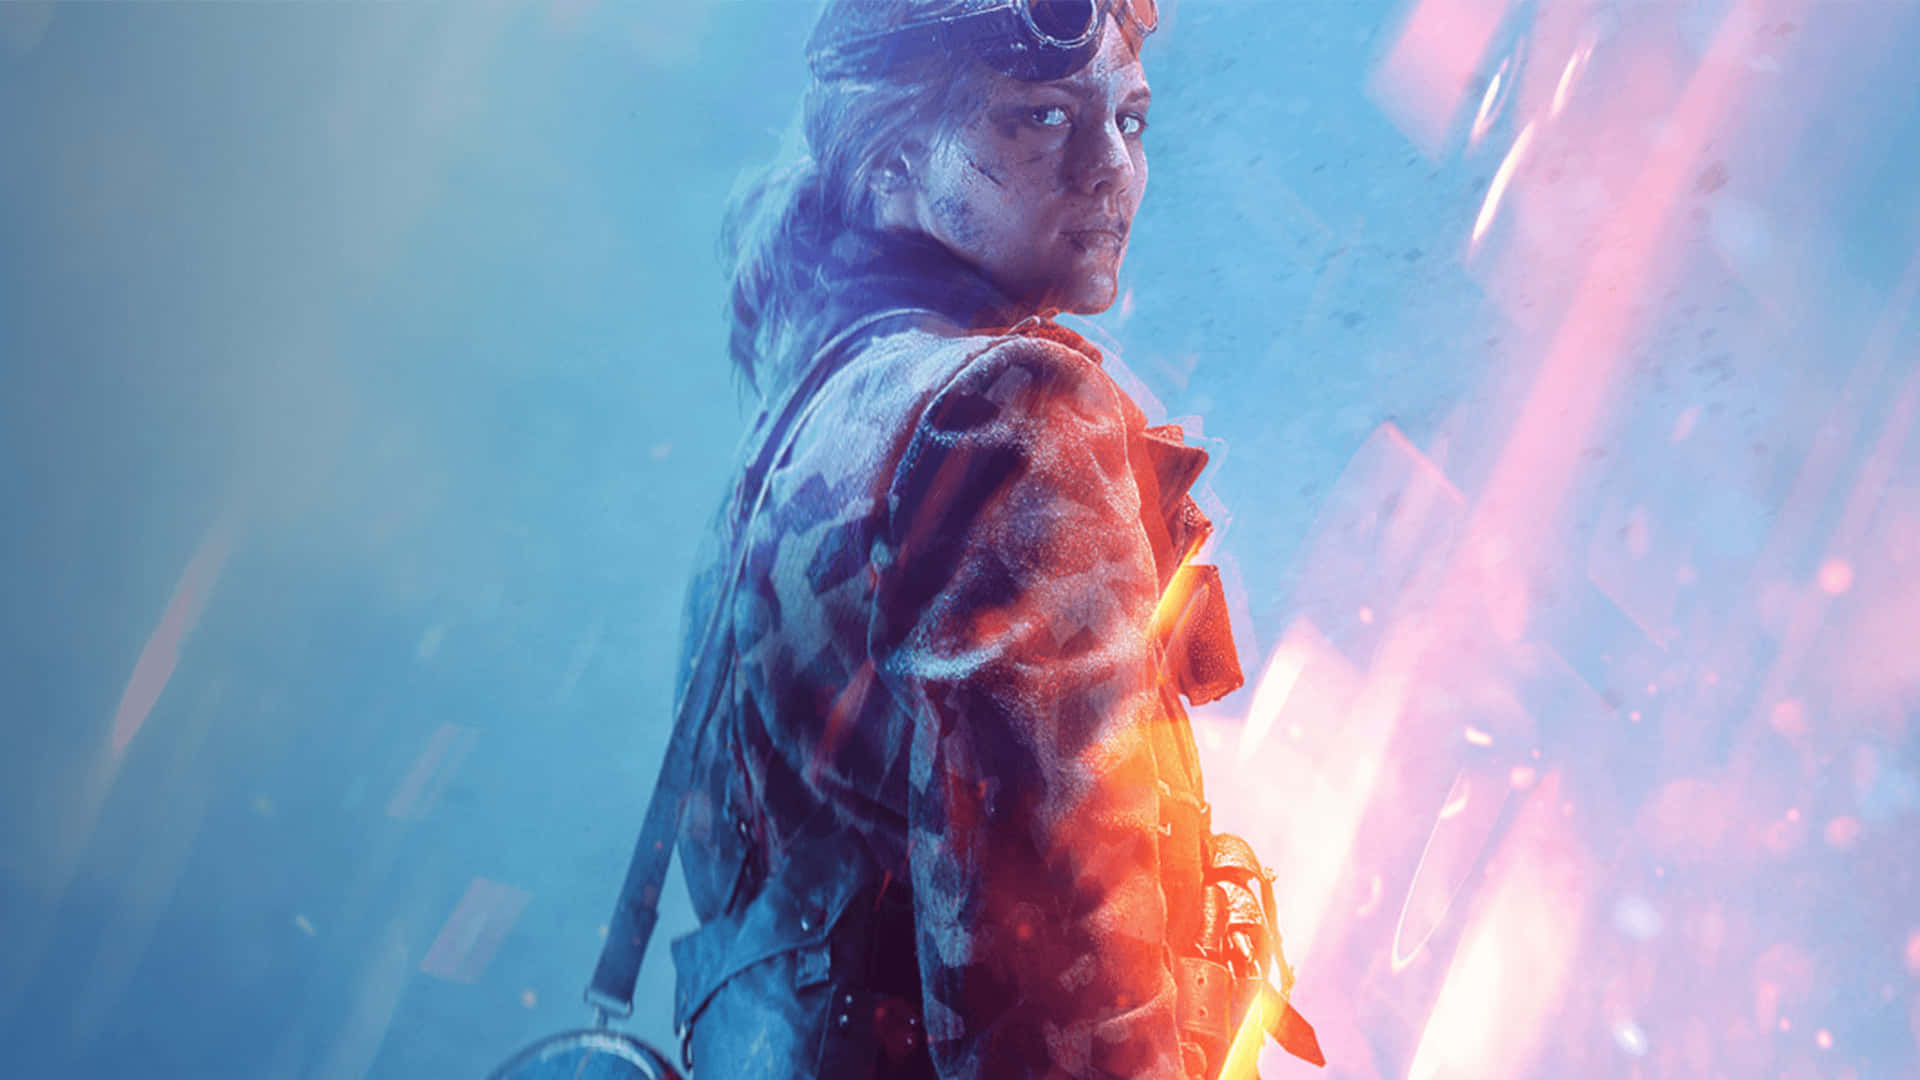 Play the Best Battlefield V Today!